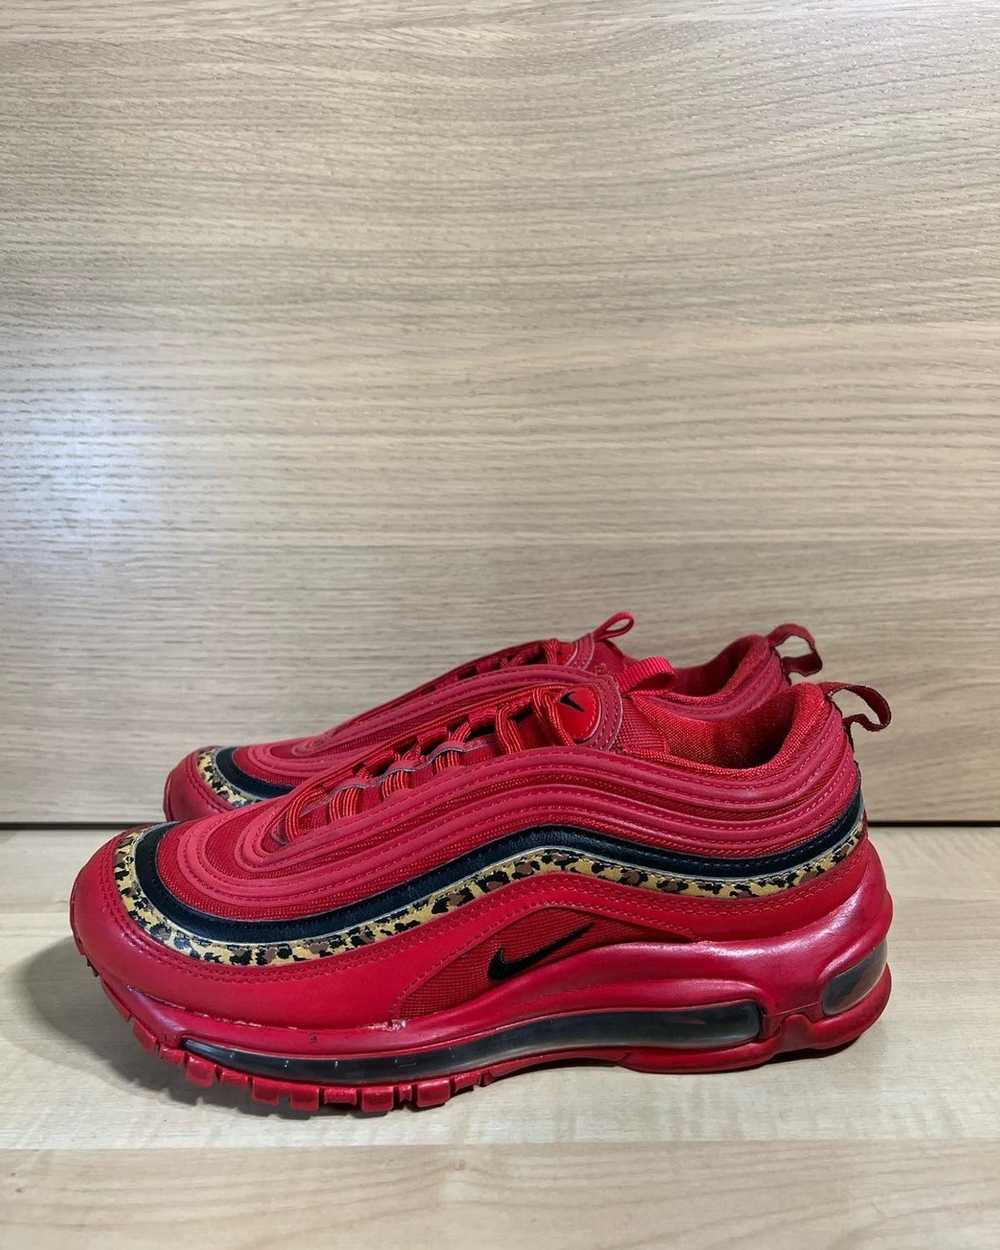 Nike Air Max 97 “Leopard Pack Red” - image 3